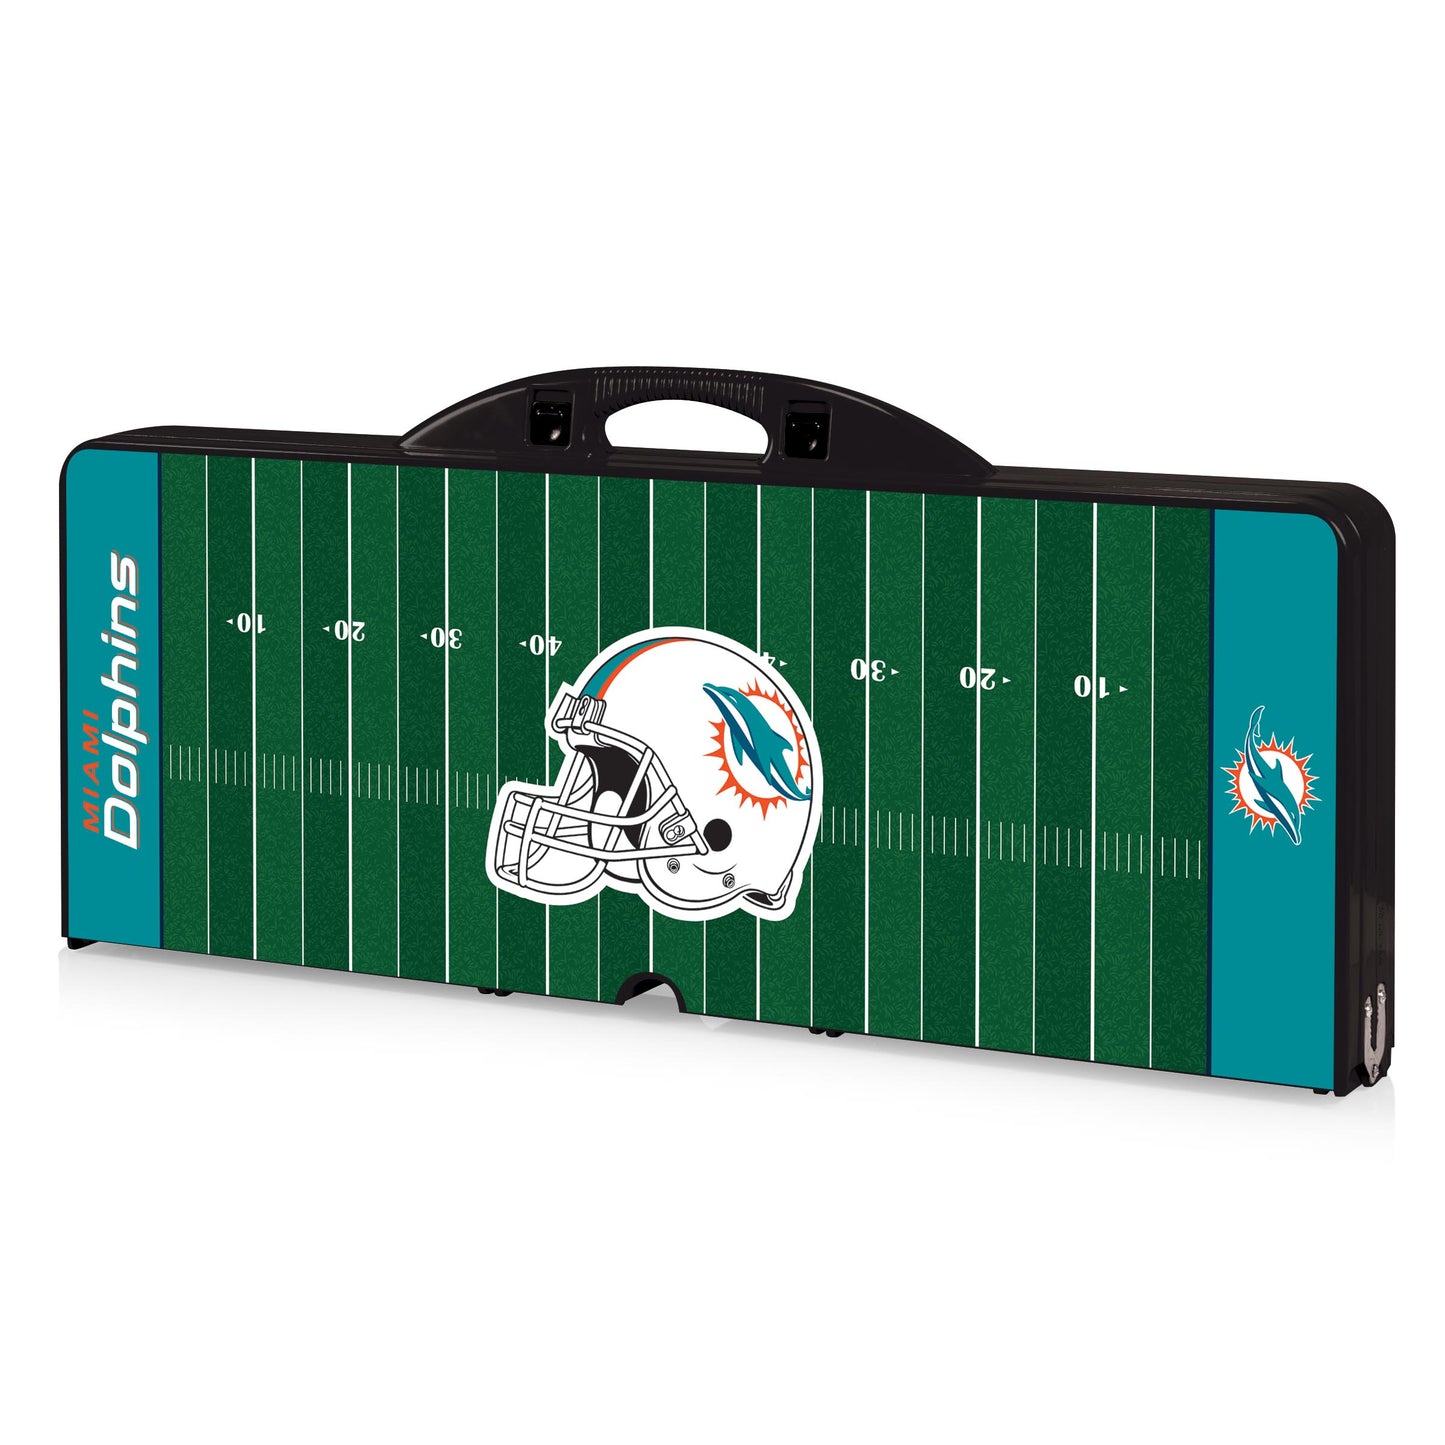 Miami Dolphins - Picnic Table Portable Folding Table with Seats - Football Field Style